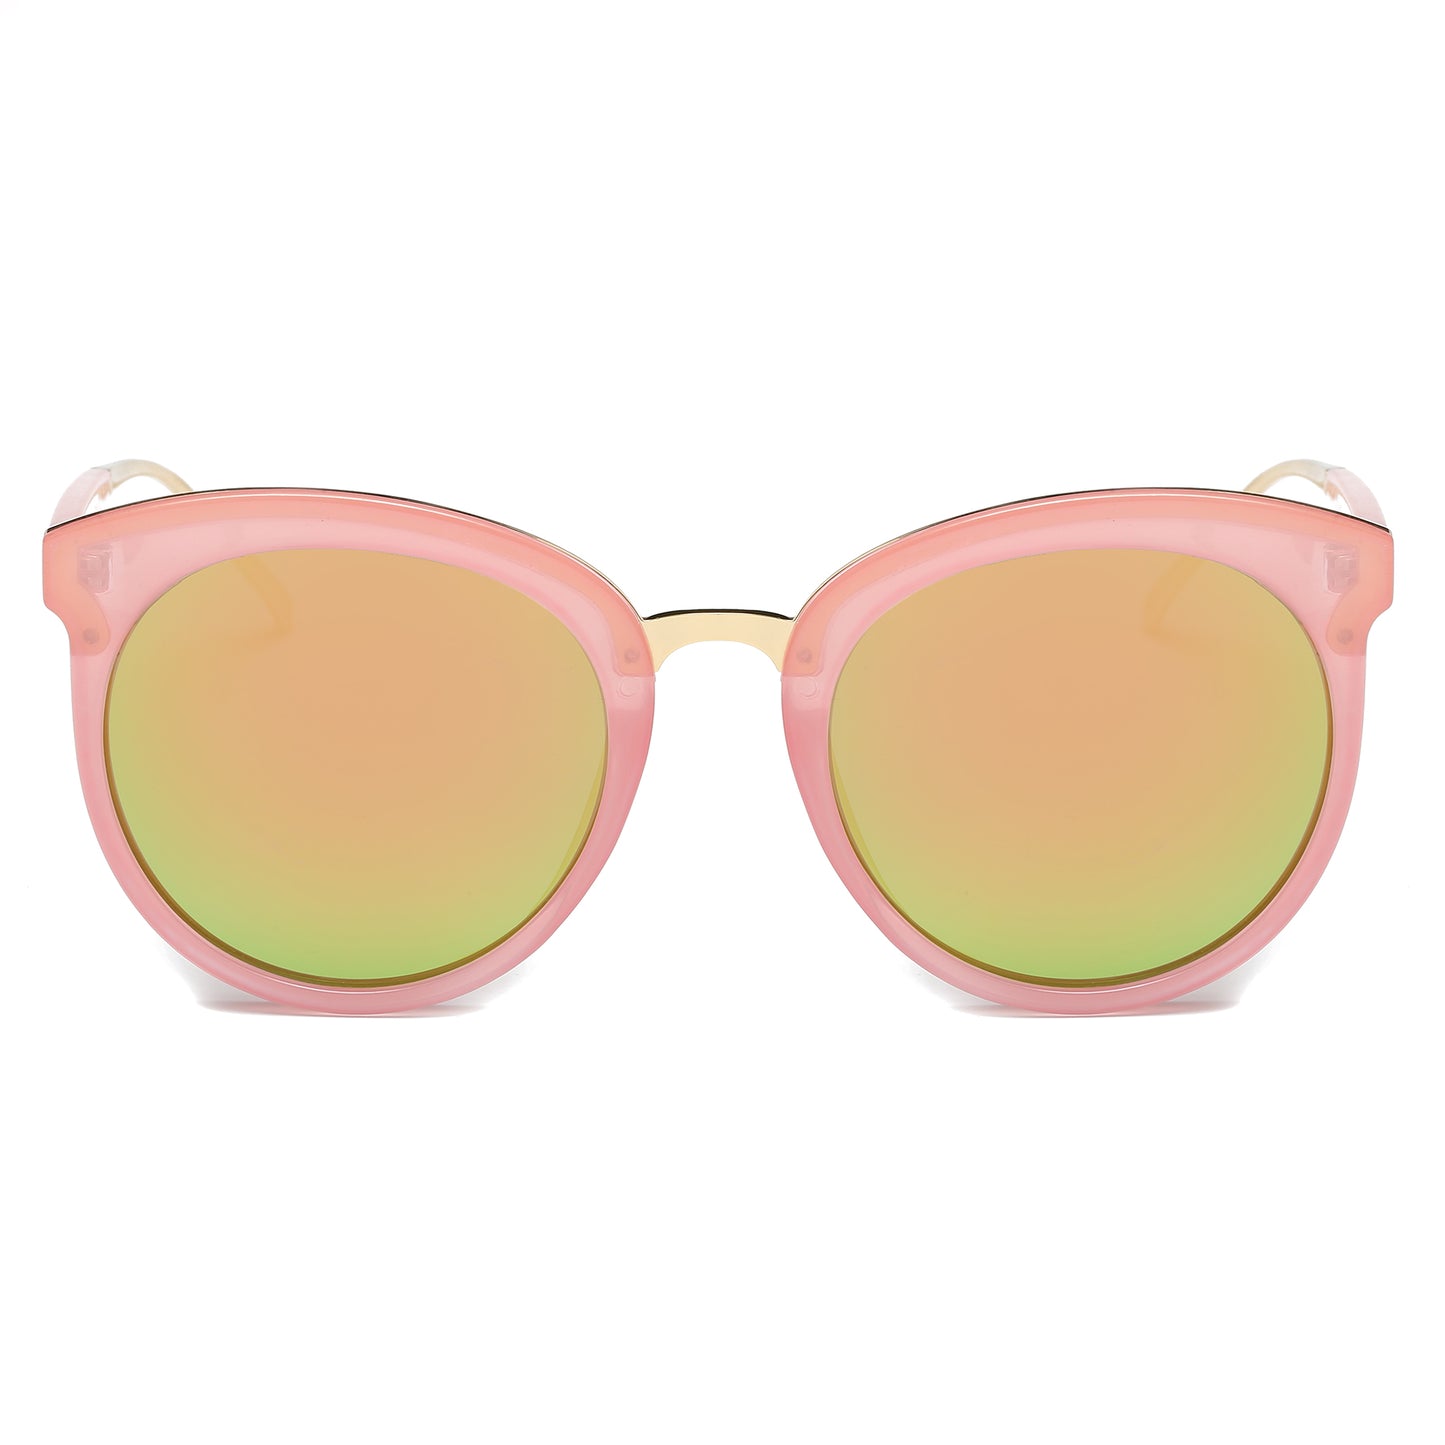 LAGUNA SUNGLASS IN PINK WITH PINK TO ORANGE MIRROR LENSES